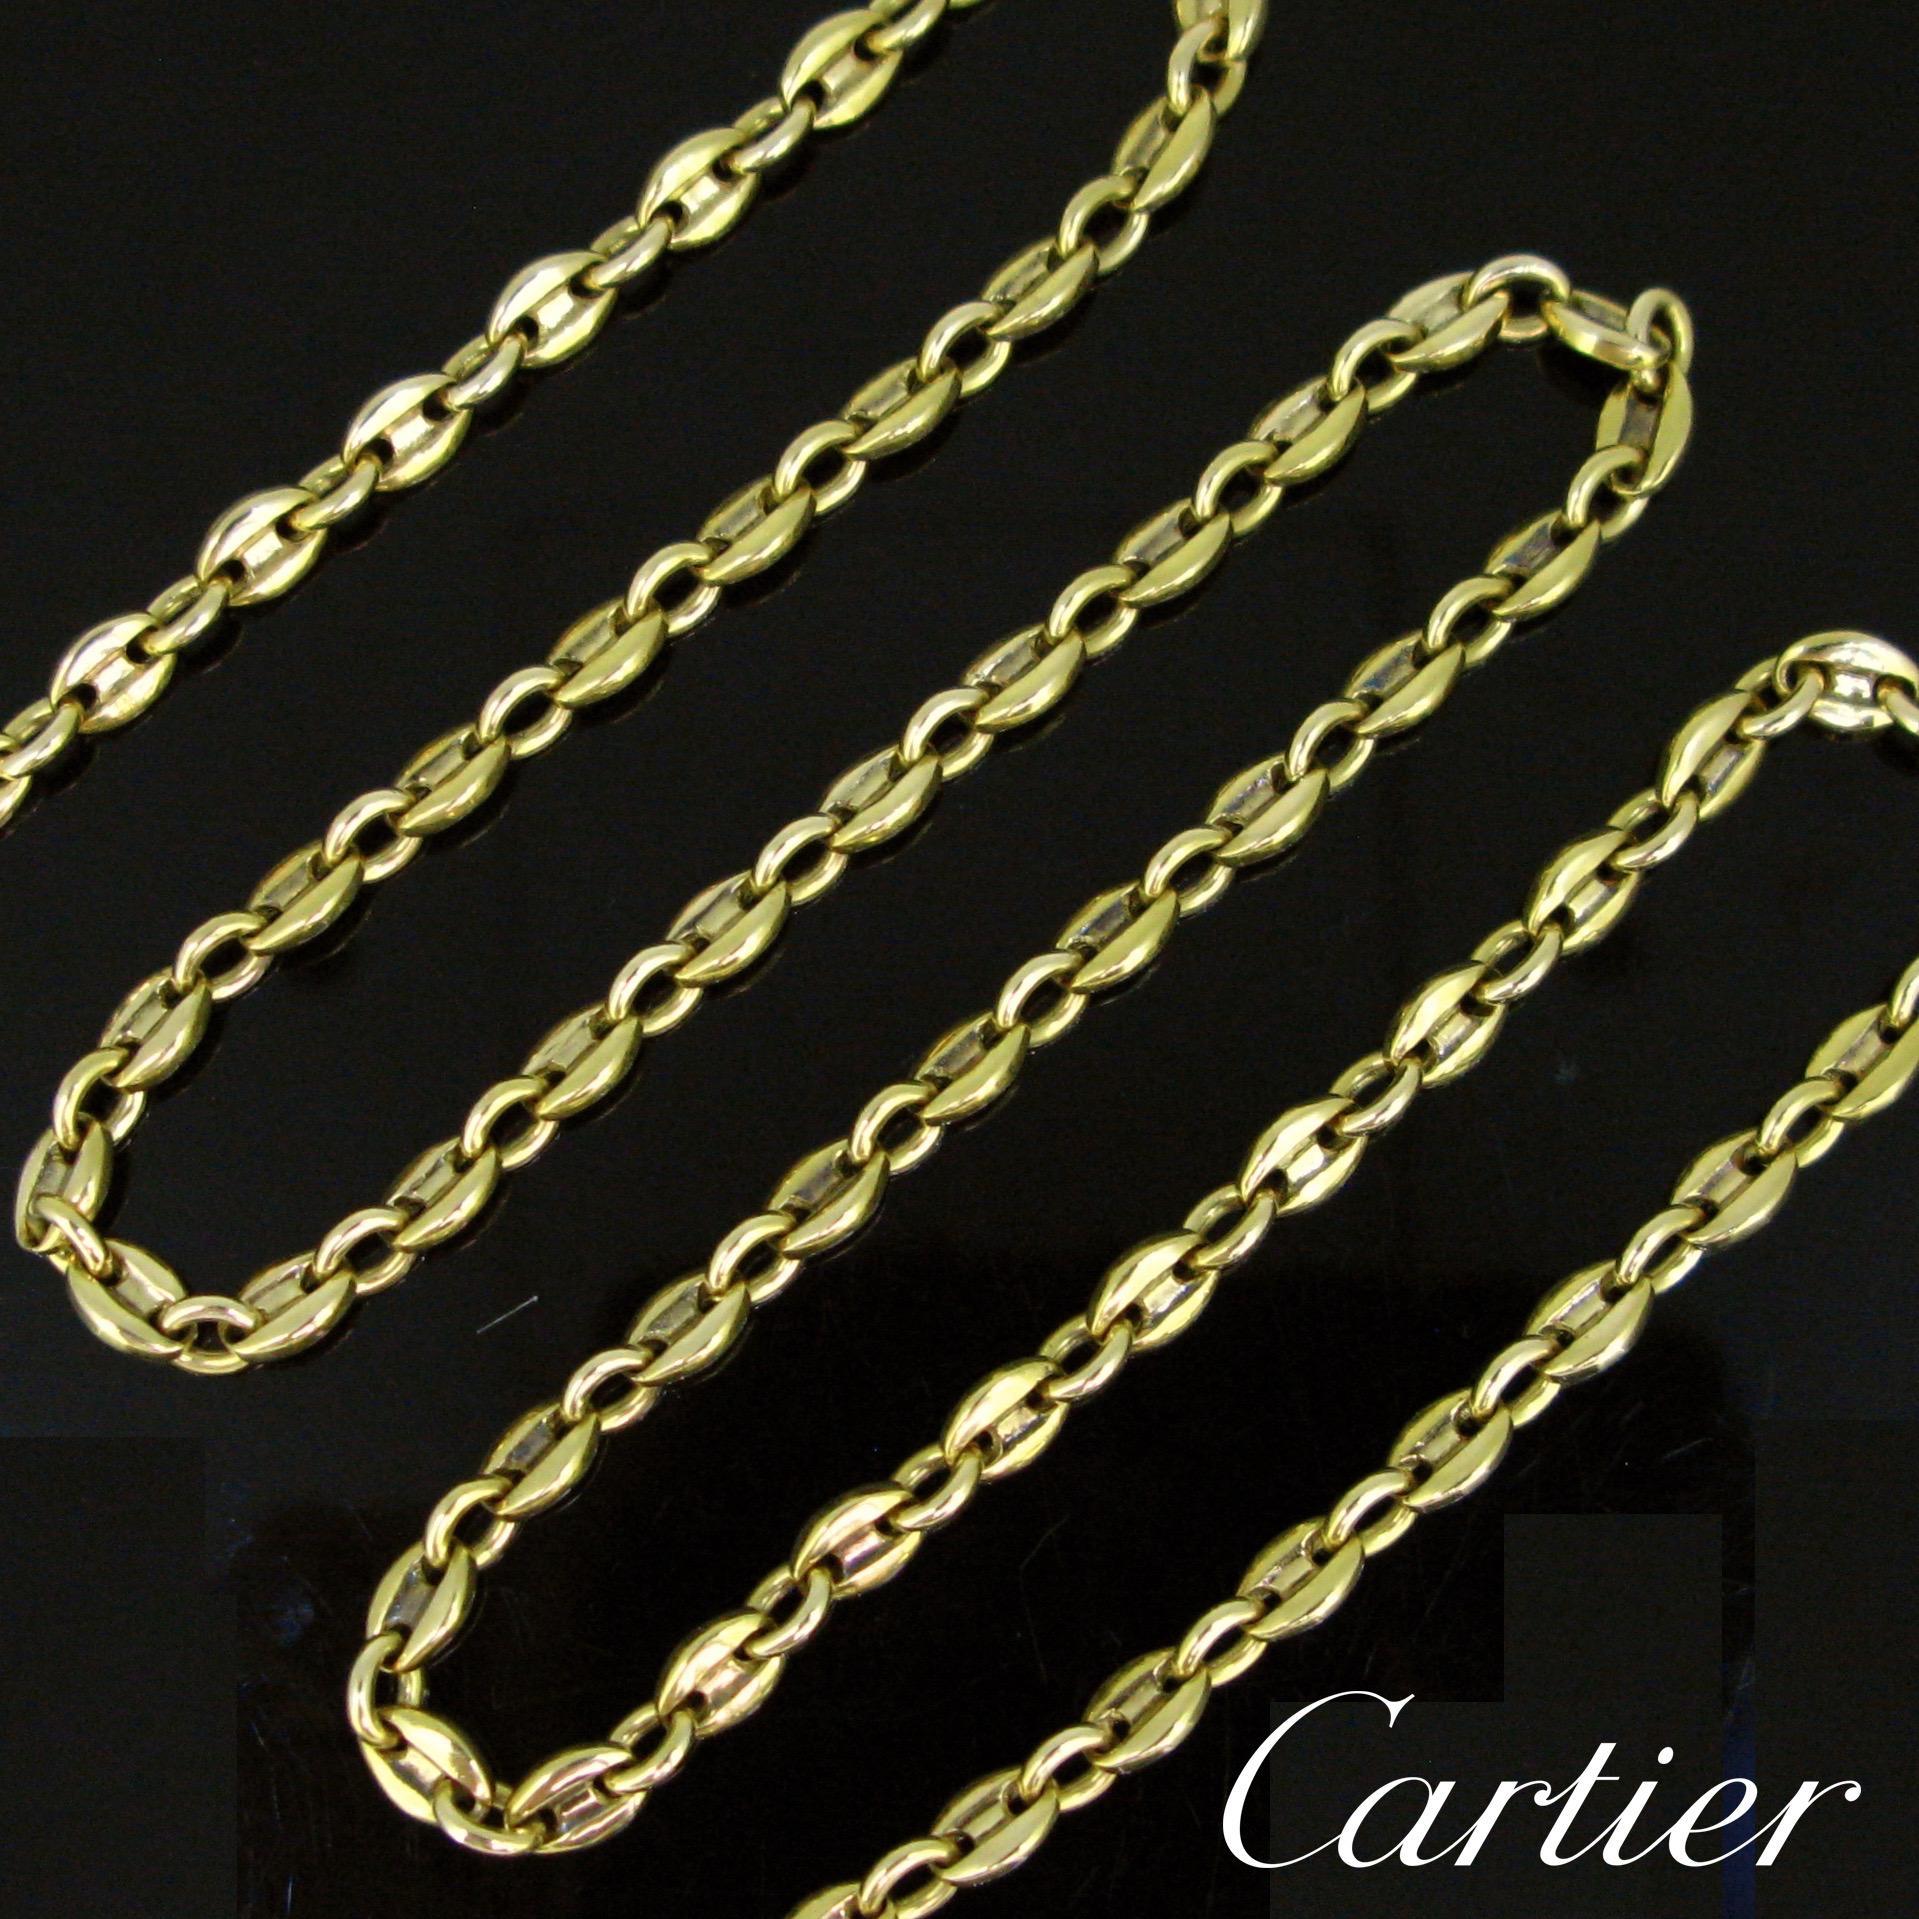 Weight:	33.6gr


Metal:		18kt yellow Gold

Condition:	Very Good

Signature:	Cartier nº166865

Comments:		This bracelet is made in 18kt yellow gold. It is the Grain de Café (coffee bean) link chain necklace. It is signed and numbered. It is in very